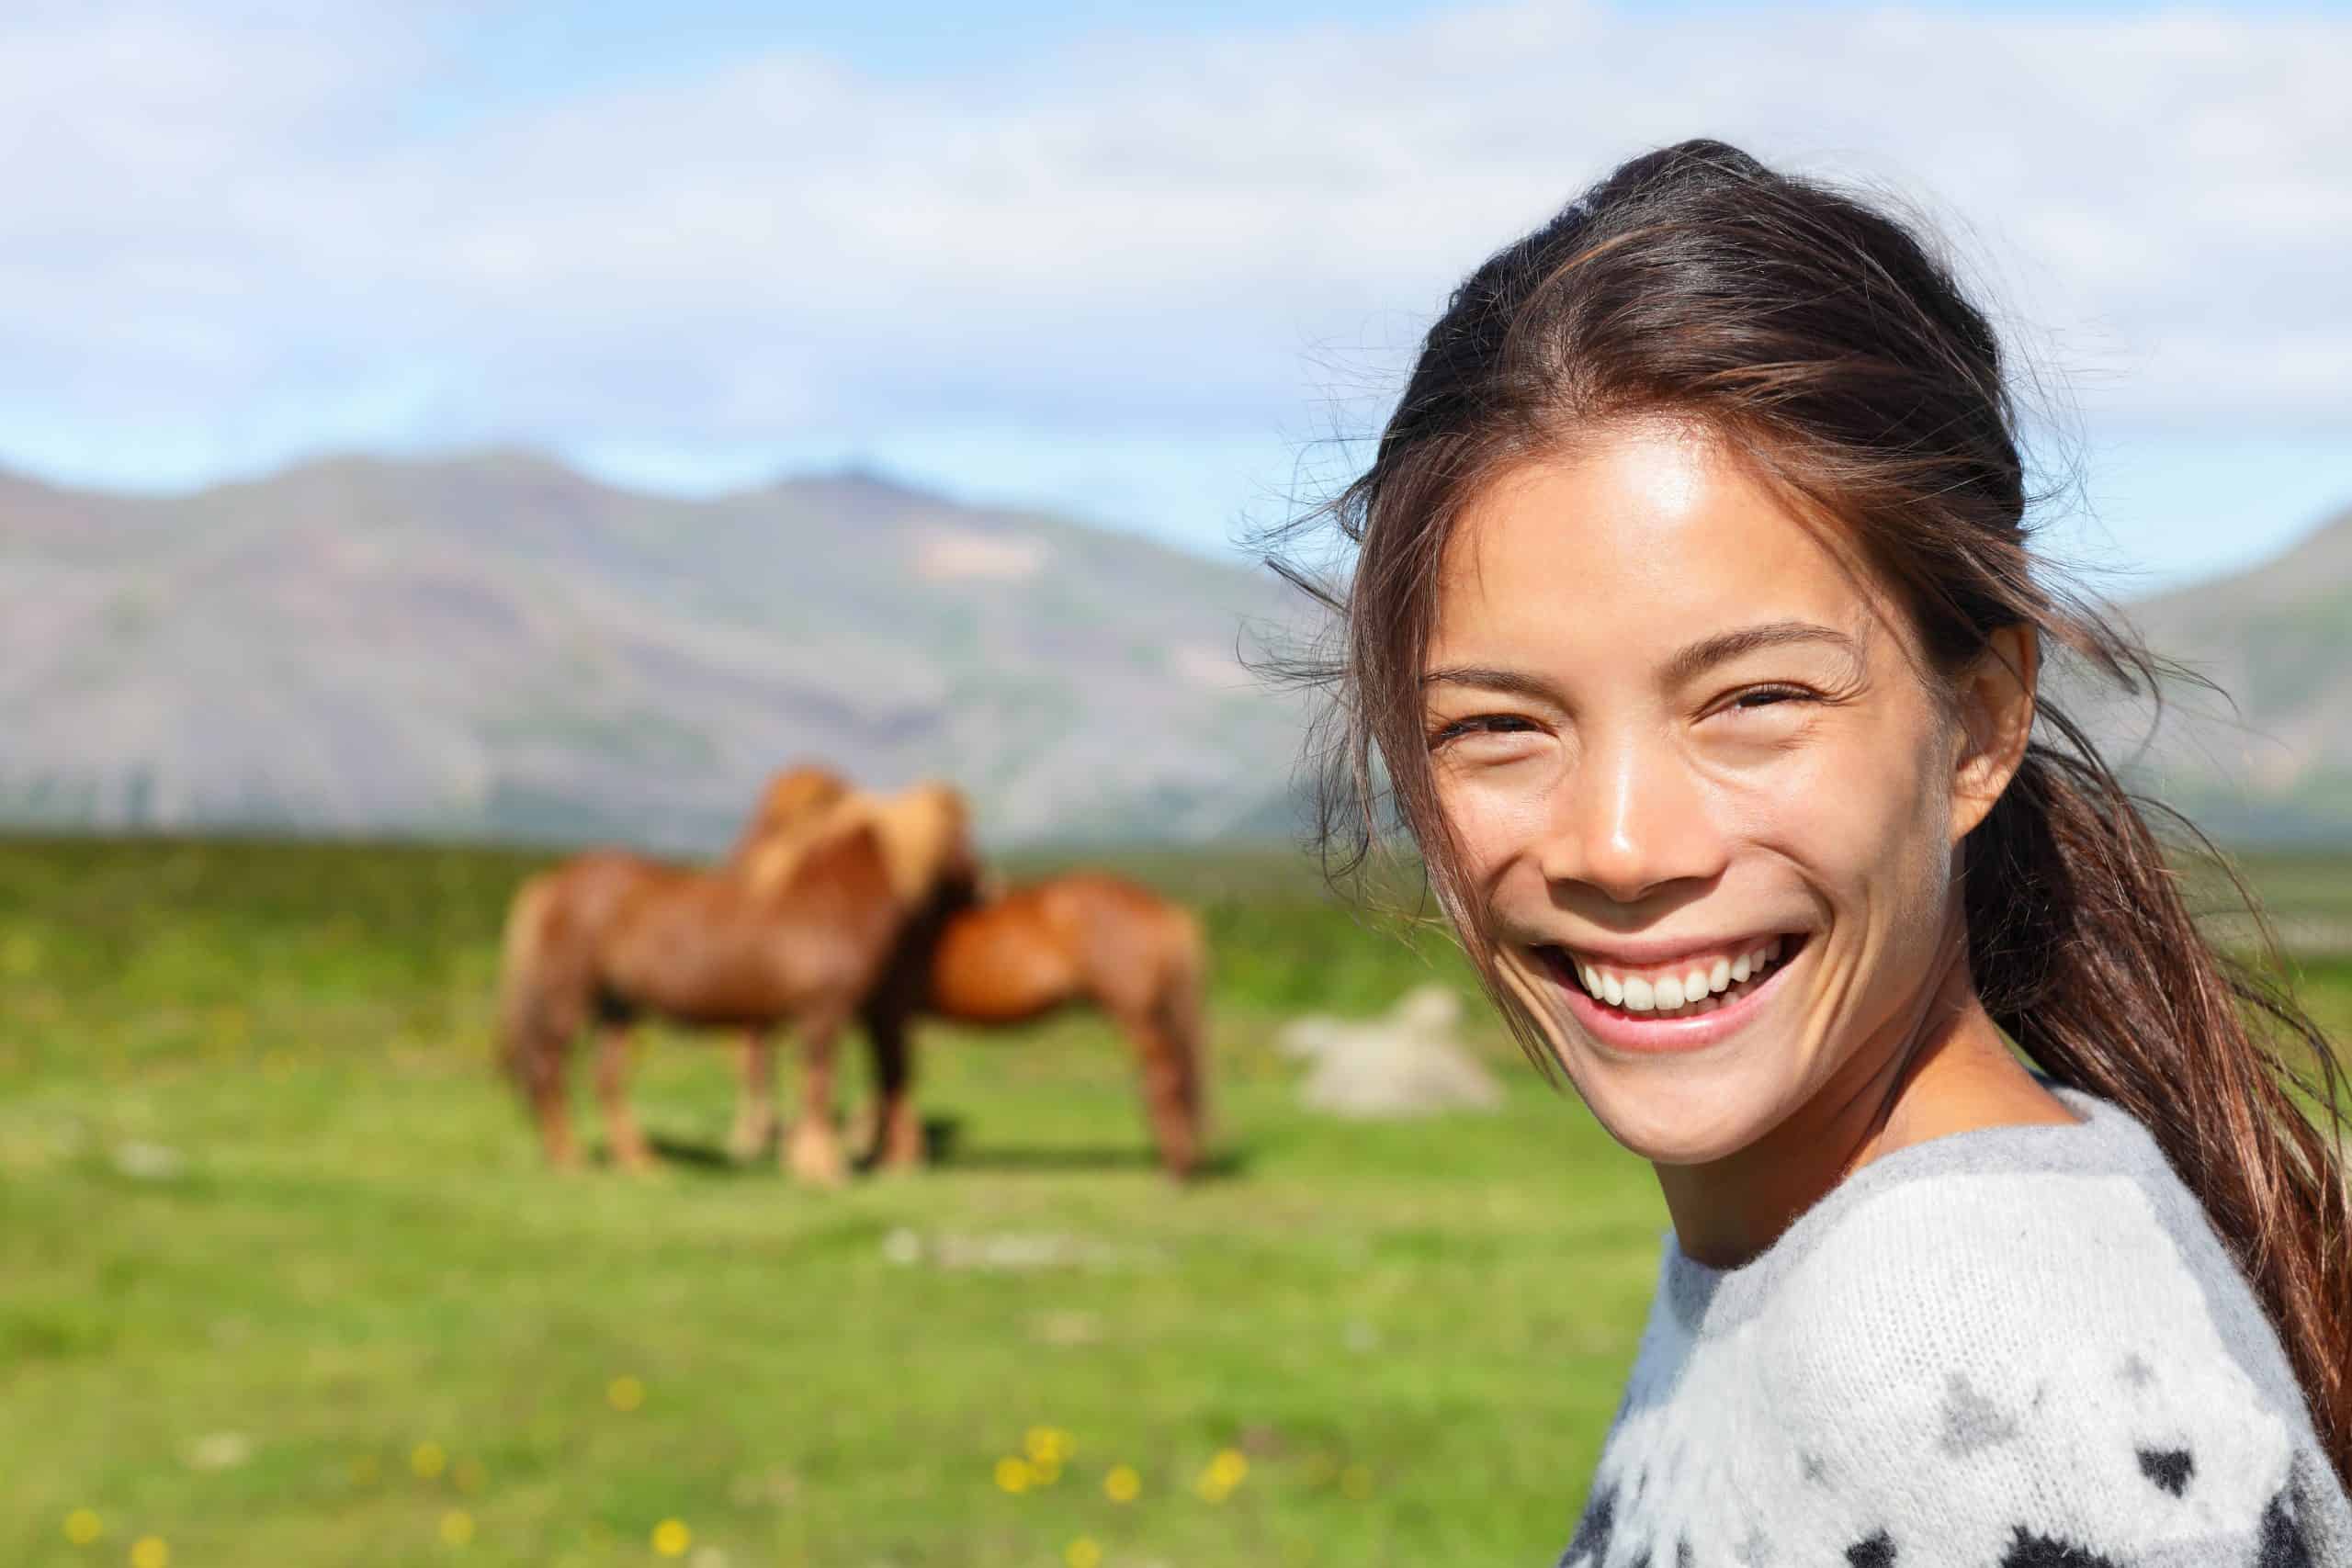 Woman on Iceland smiling with Icelandic horses. Portrait of happy multicultural girl wearing Icelandic sweater standing outdoors in nature field in front of horse.